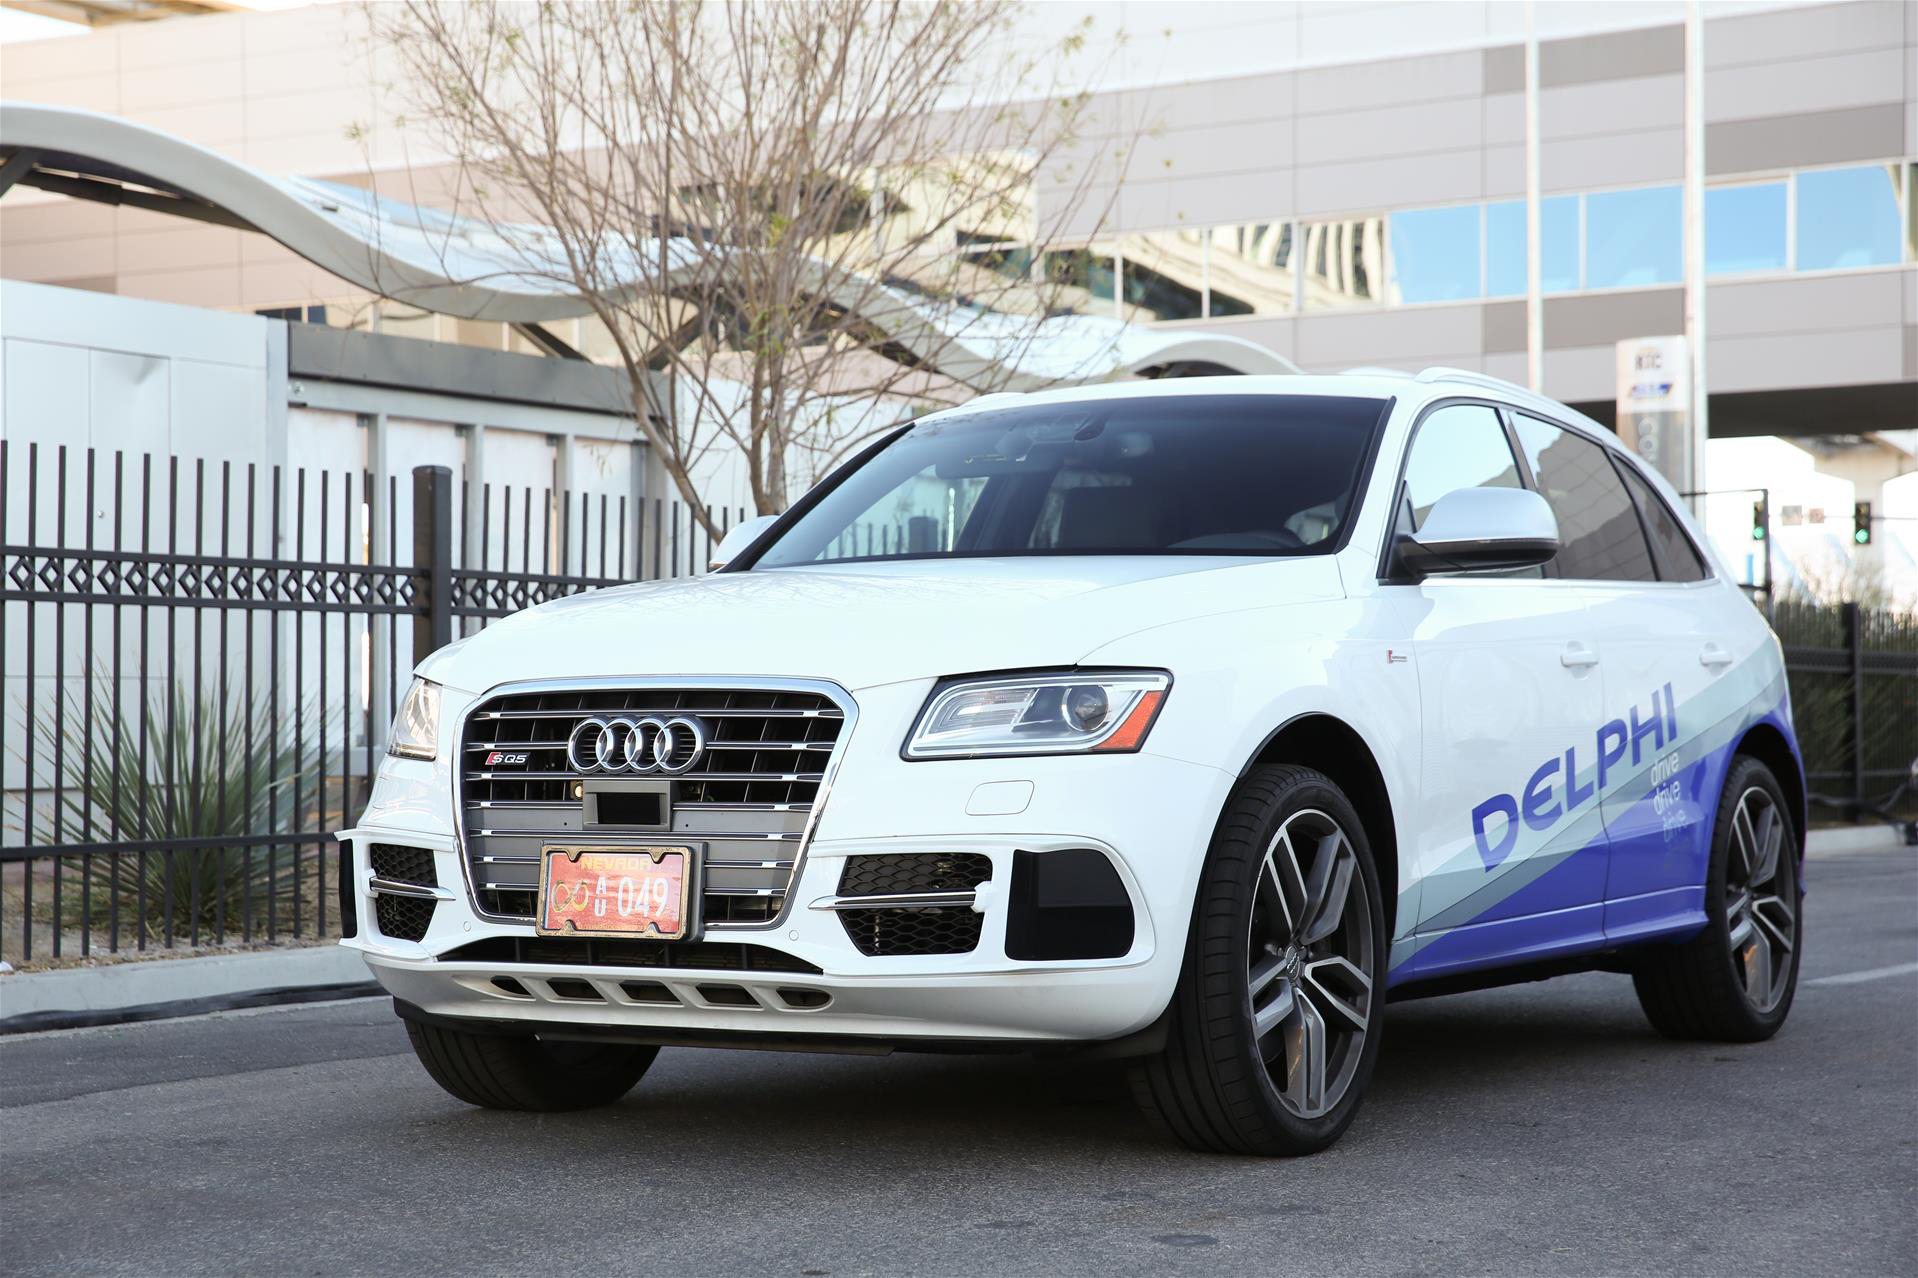 PHOTO: The Delphi Automotive PLC driverless-car is shown in this press photo.